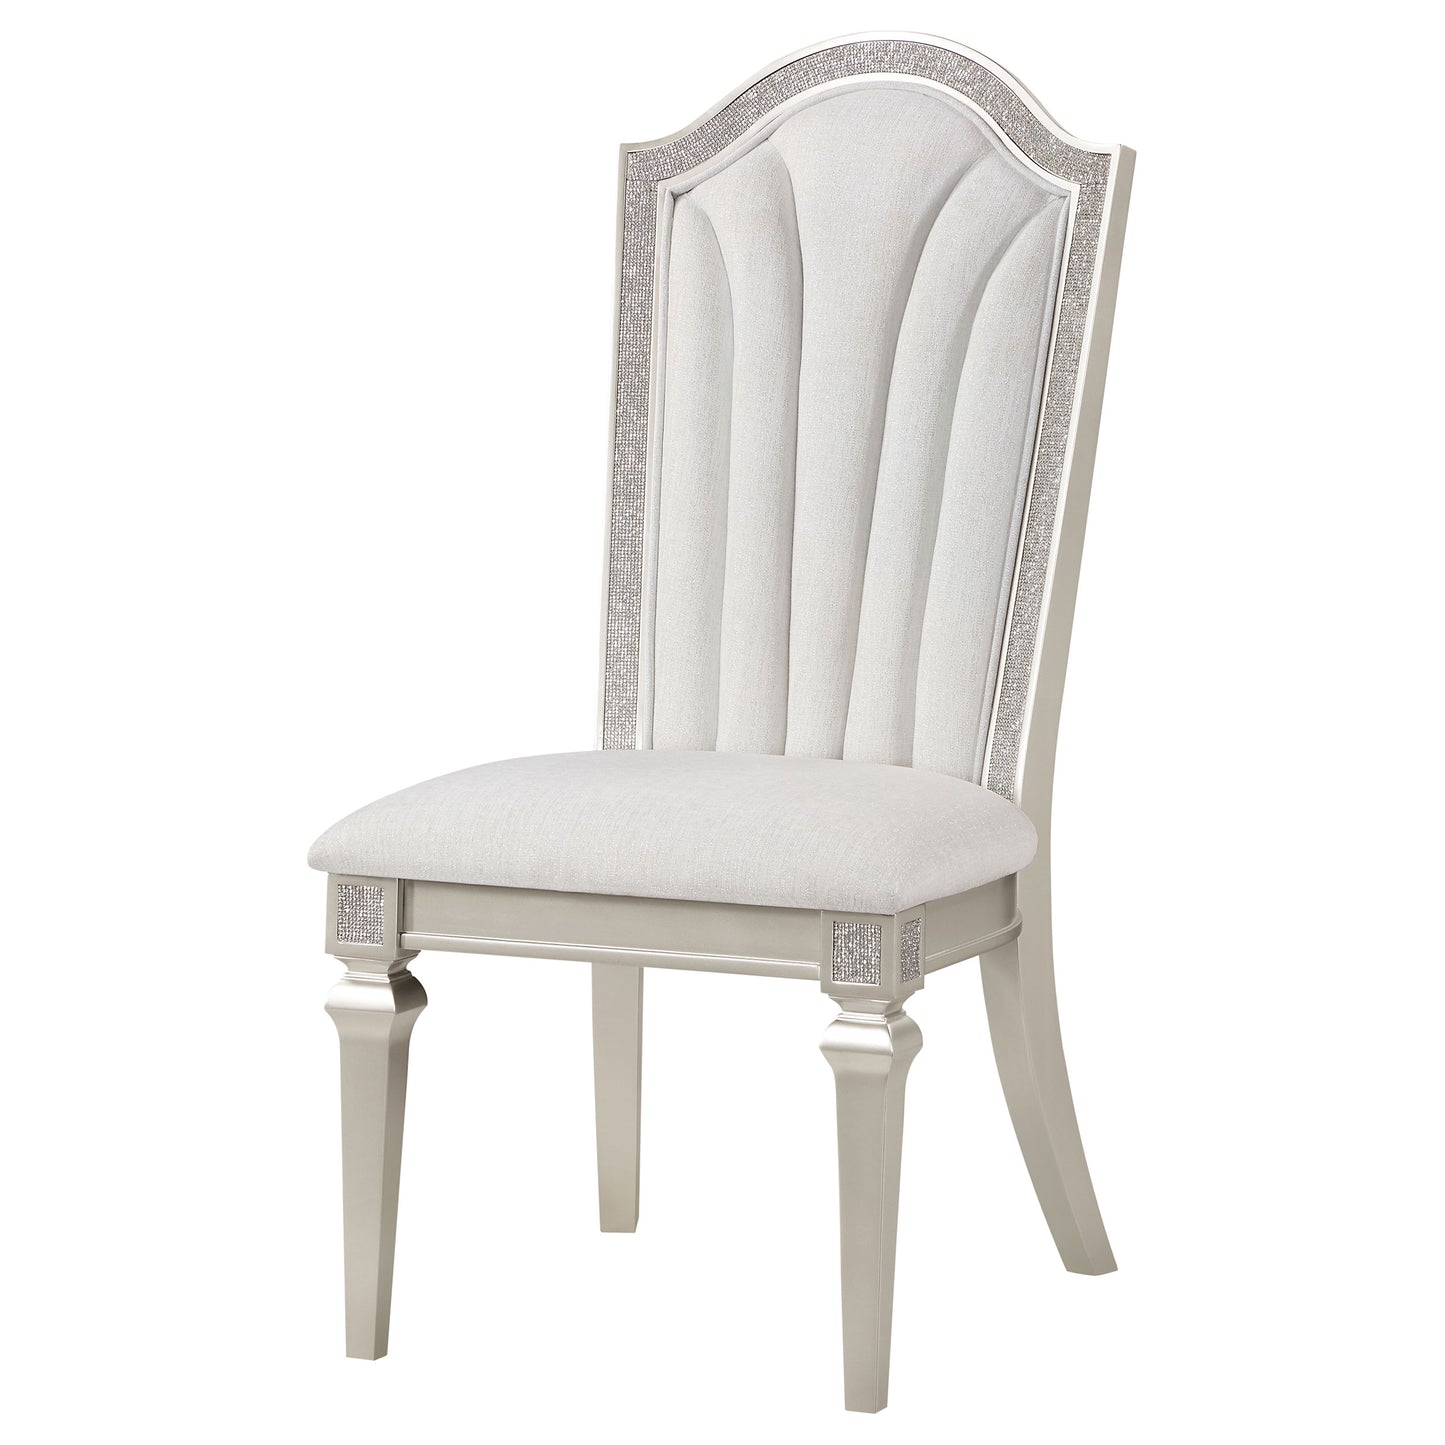 Evangeline Upholstered Dining Side Chair with Faux Diamond Trim Ivory and Silver Oak (Set of 2)